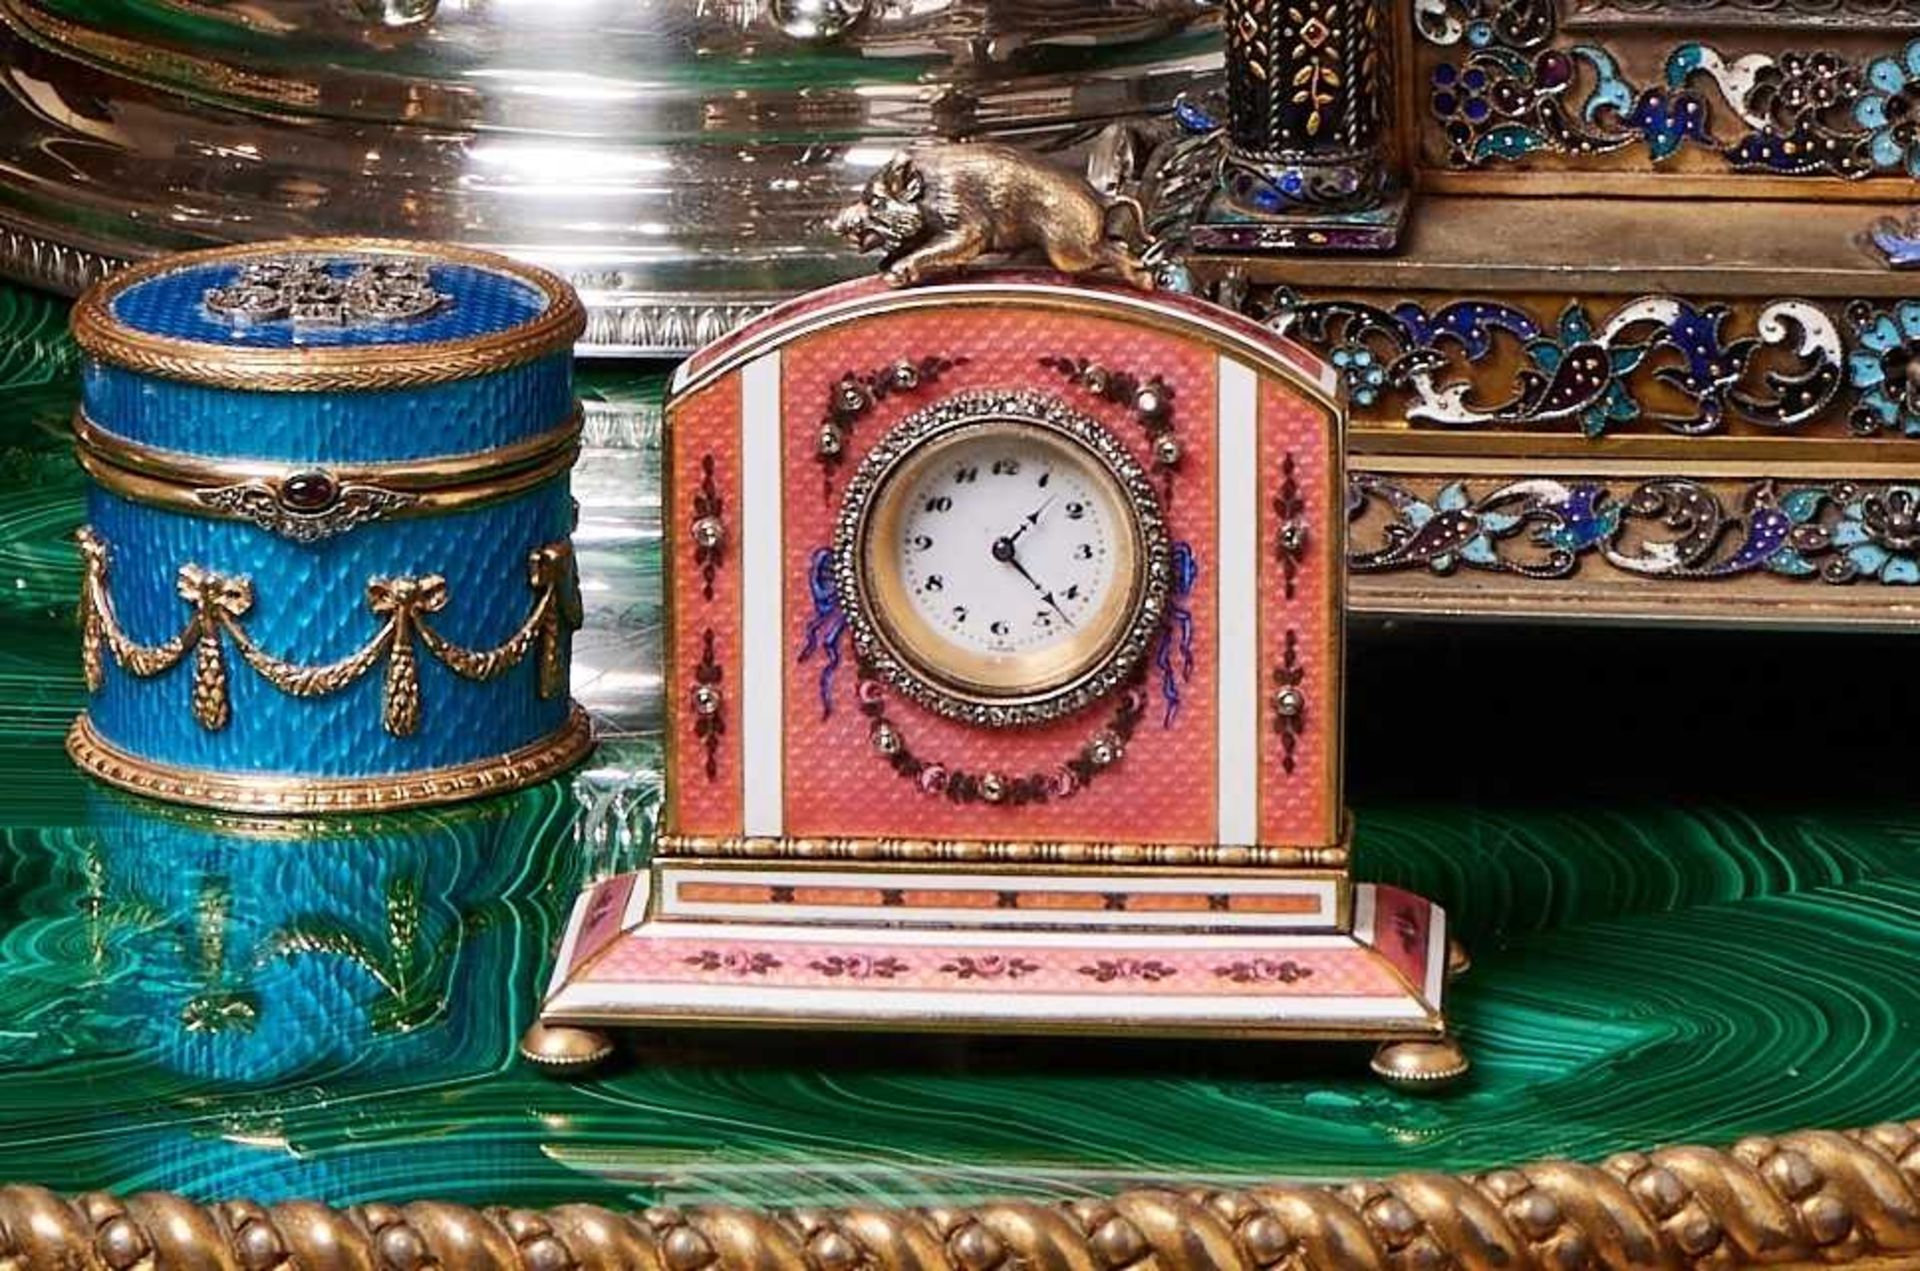 A FABERGE STYLE DIAMOND SET, GUILLOCHE ENAMEL AND SILVER GILT TRAVELLING CLOCK - Image 2 of 3